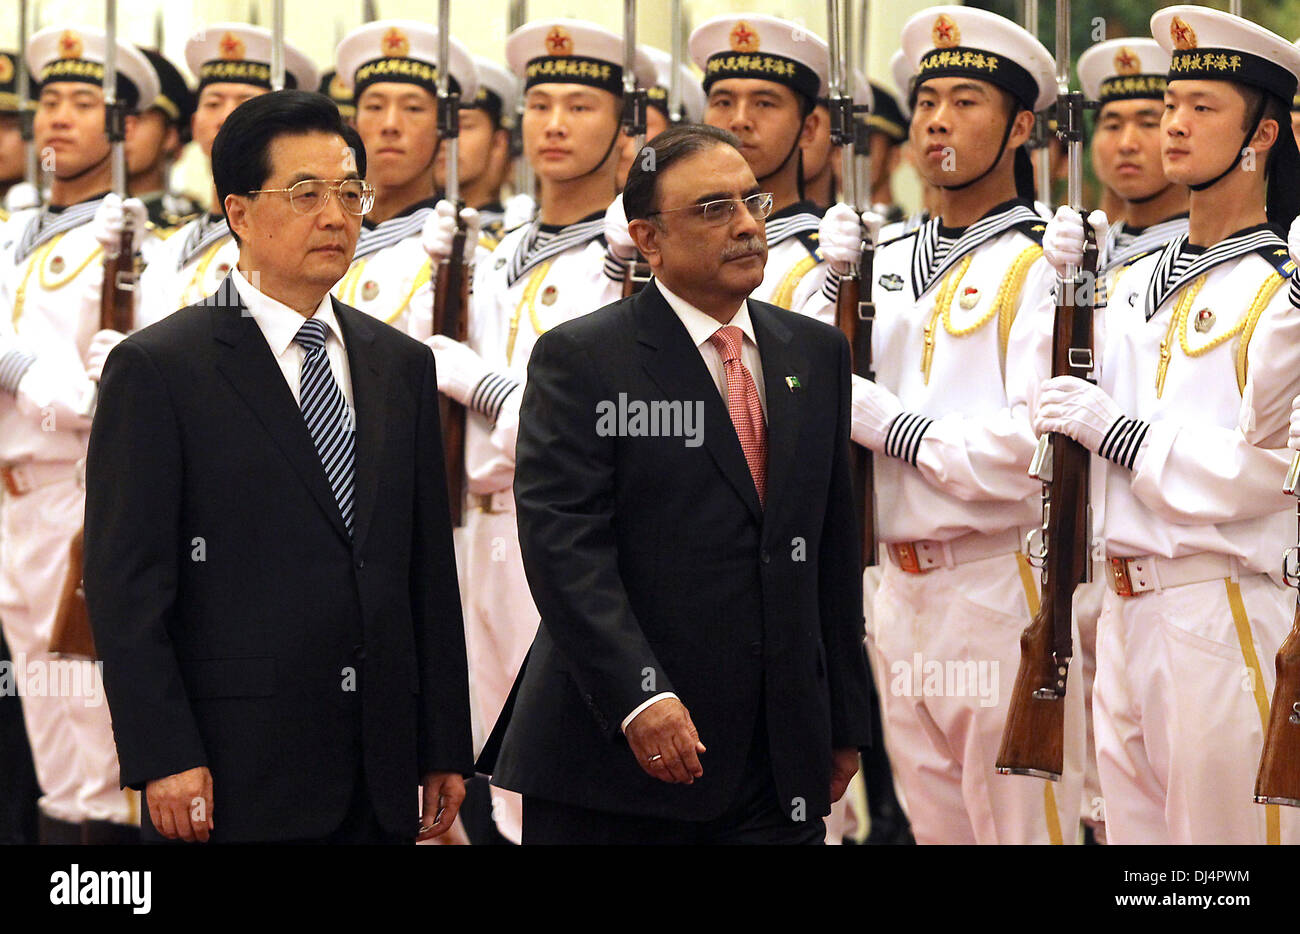 Beijing, CHINA, China. 7th June, 2012. Chinese President Hu Jintao escorts Pakistan President Asif Ali Zardari past his cabinet during a welcoming ceremony at the Great Hall of the People in Beijing on June 7, 2012. With the prospect of a decline in U.S. influence in Afghanistan over the next two years, China is reaching out to Afghanistan and Pakistan in a bid to improve economic and security ties. © Stephen Shaver/ZUMAPRESS.com/Alamy Live News Stock Photo